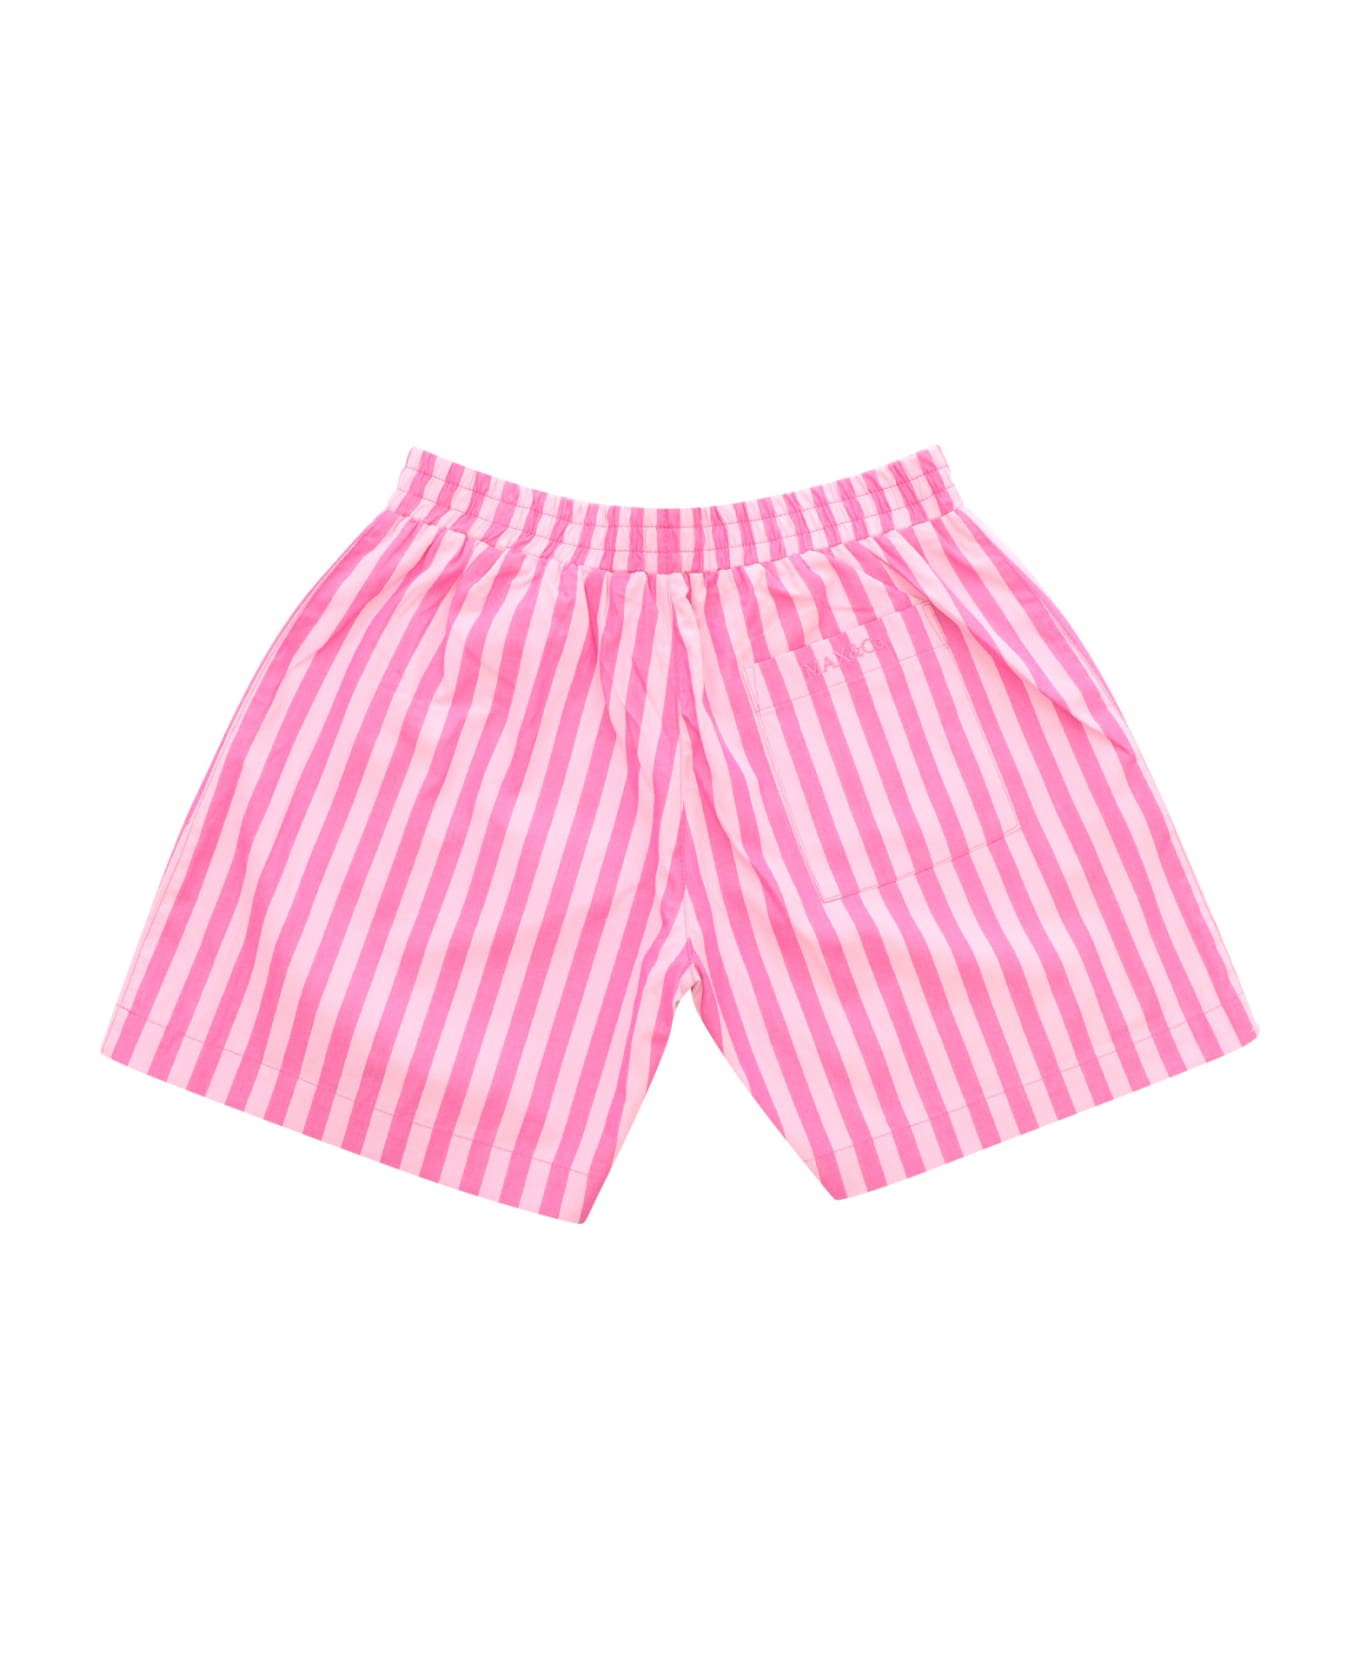 Max&Co. Pink Striped Shorts - PINK